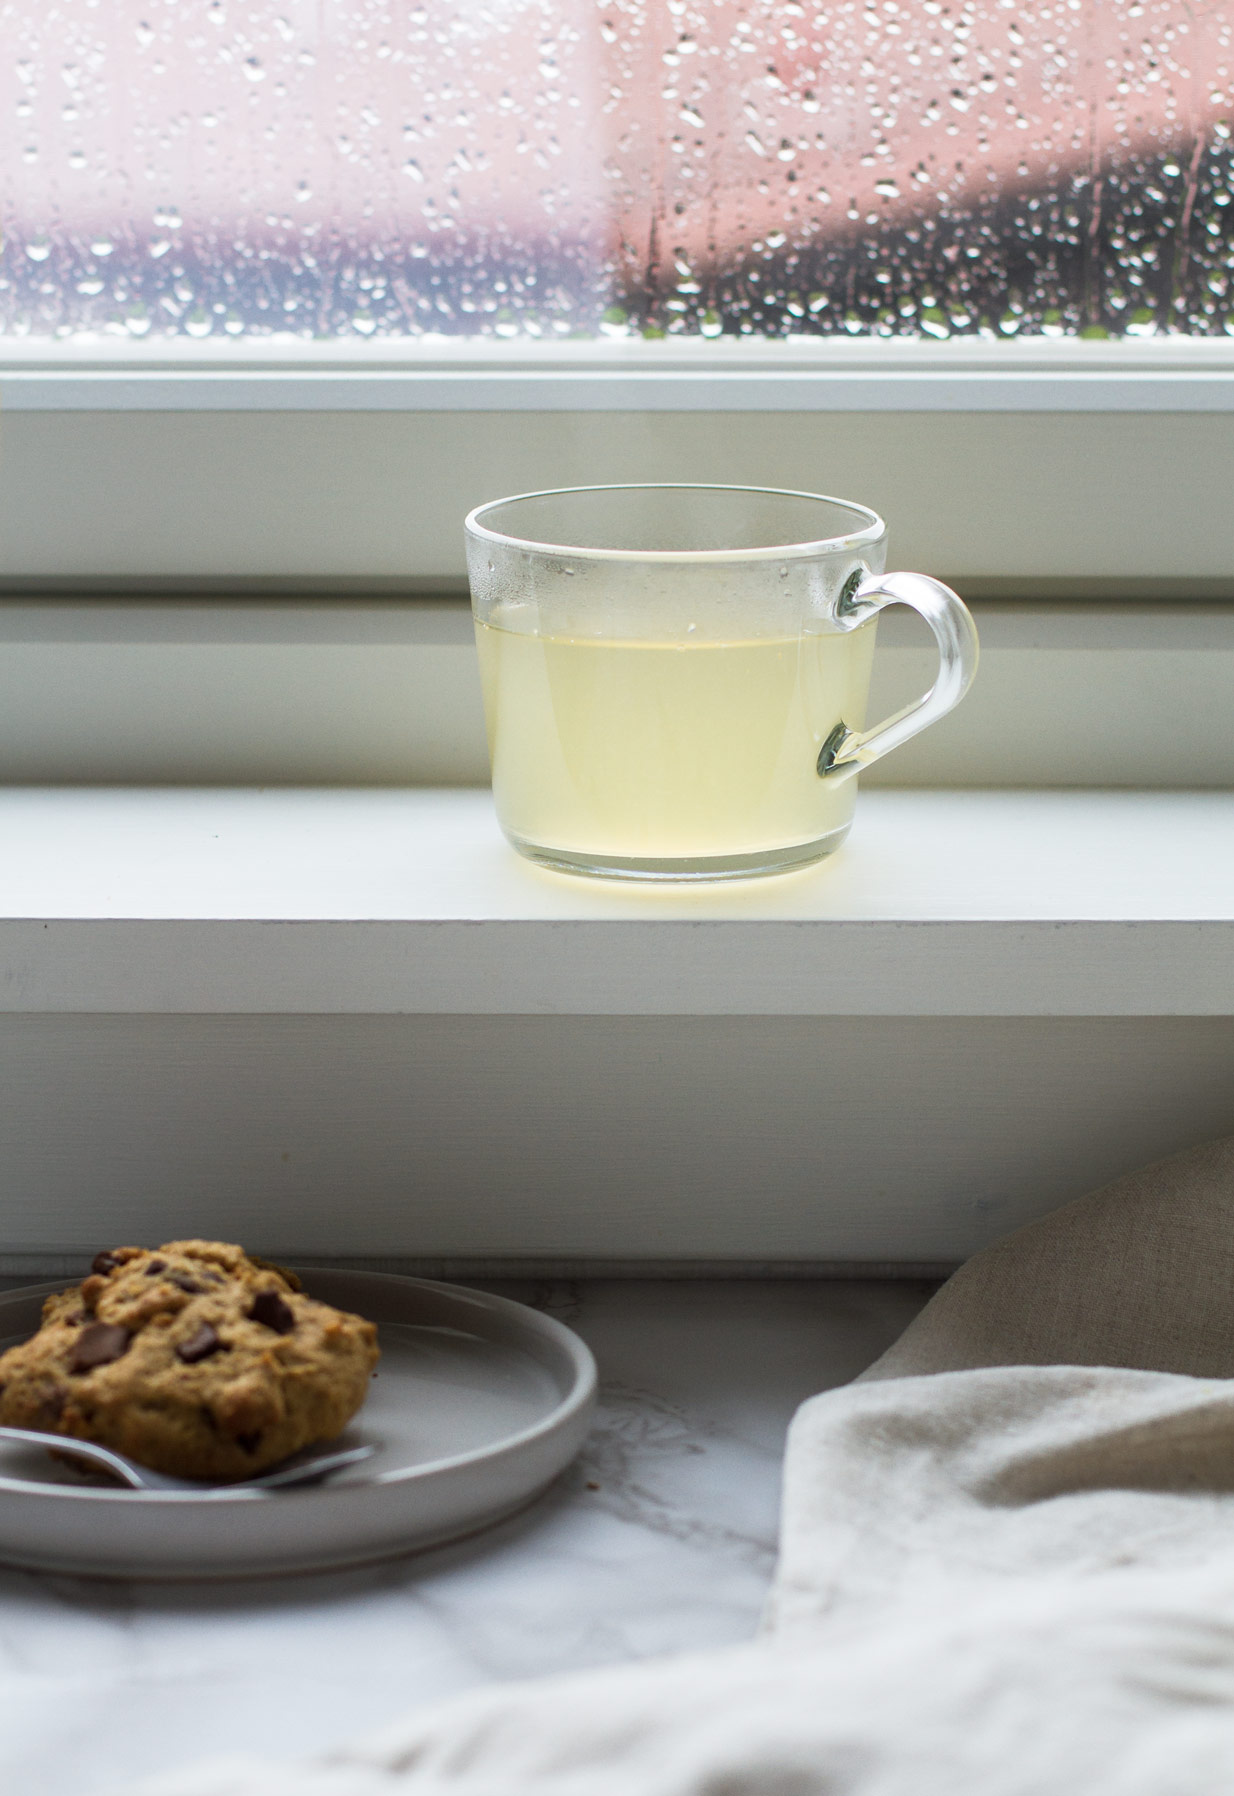 Clear mug with pale yellow drink in the window frame. Cookies on the table.